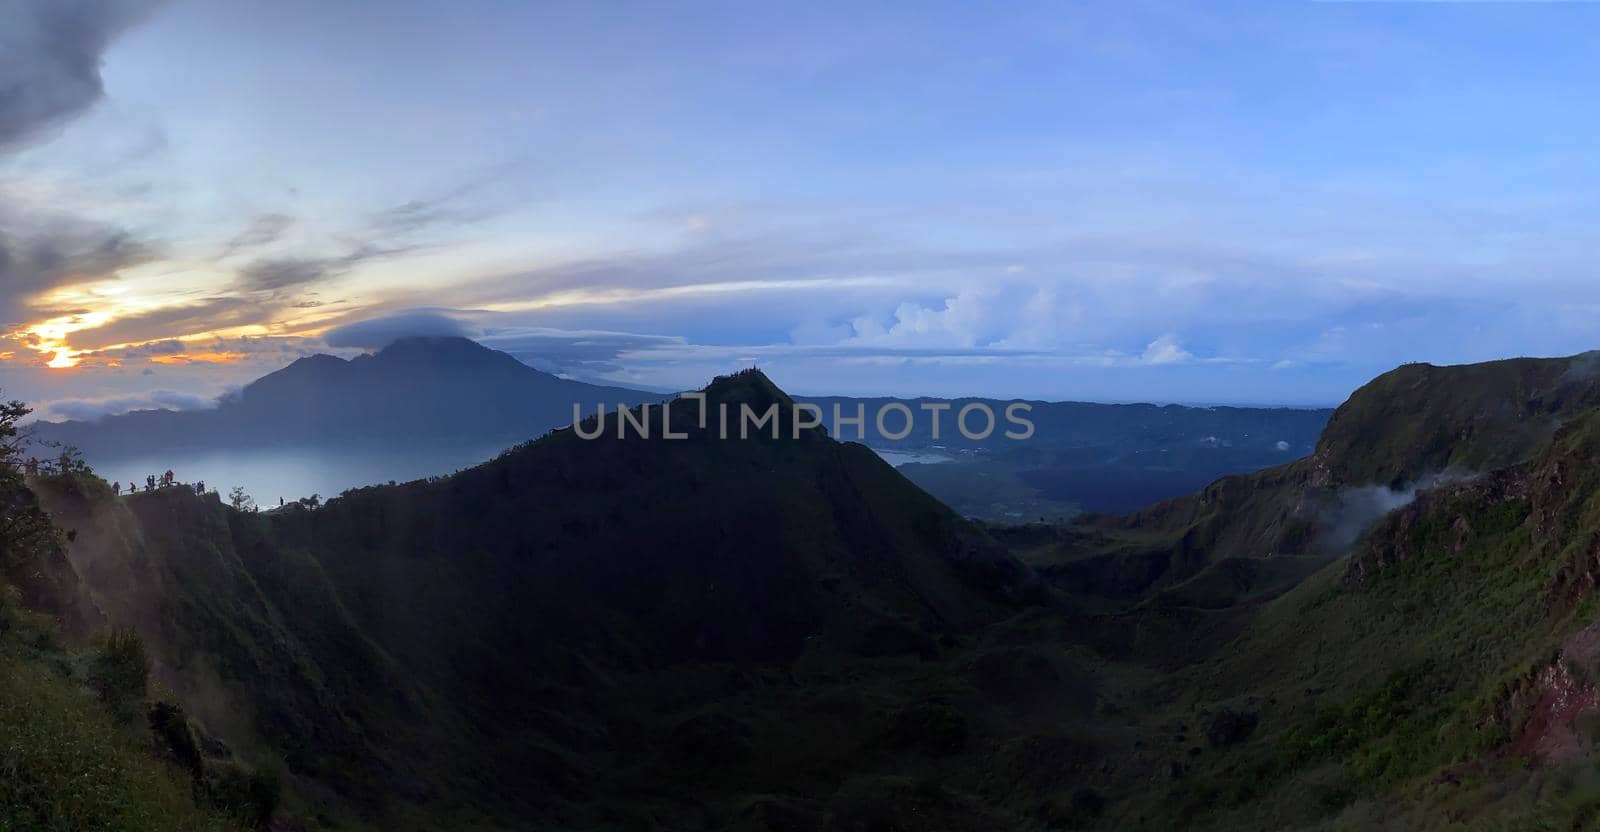 Sunrise View From Mount Batur On Bali, Indonesia - stock photo by kaliaevaen